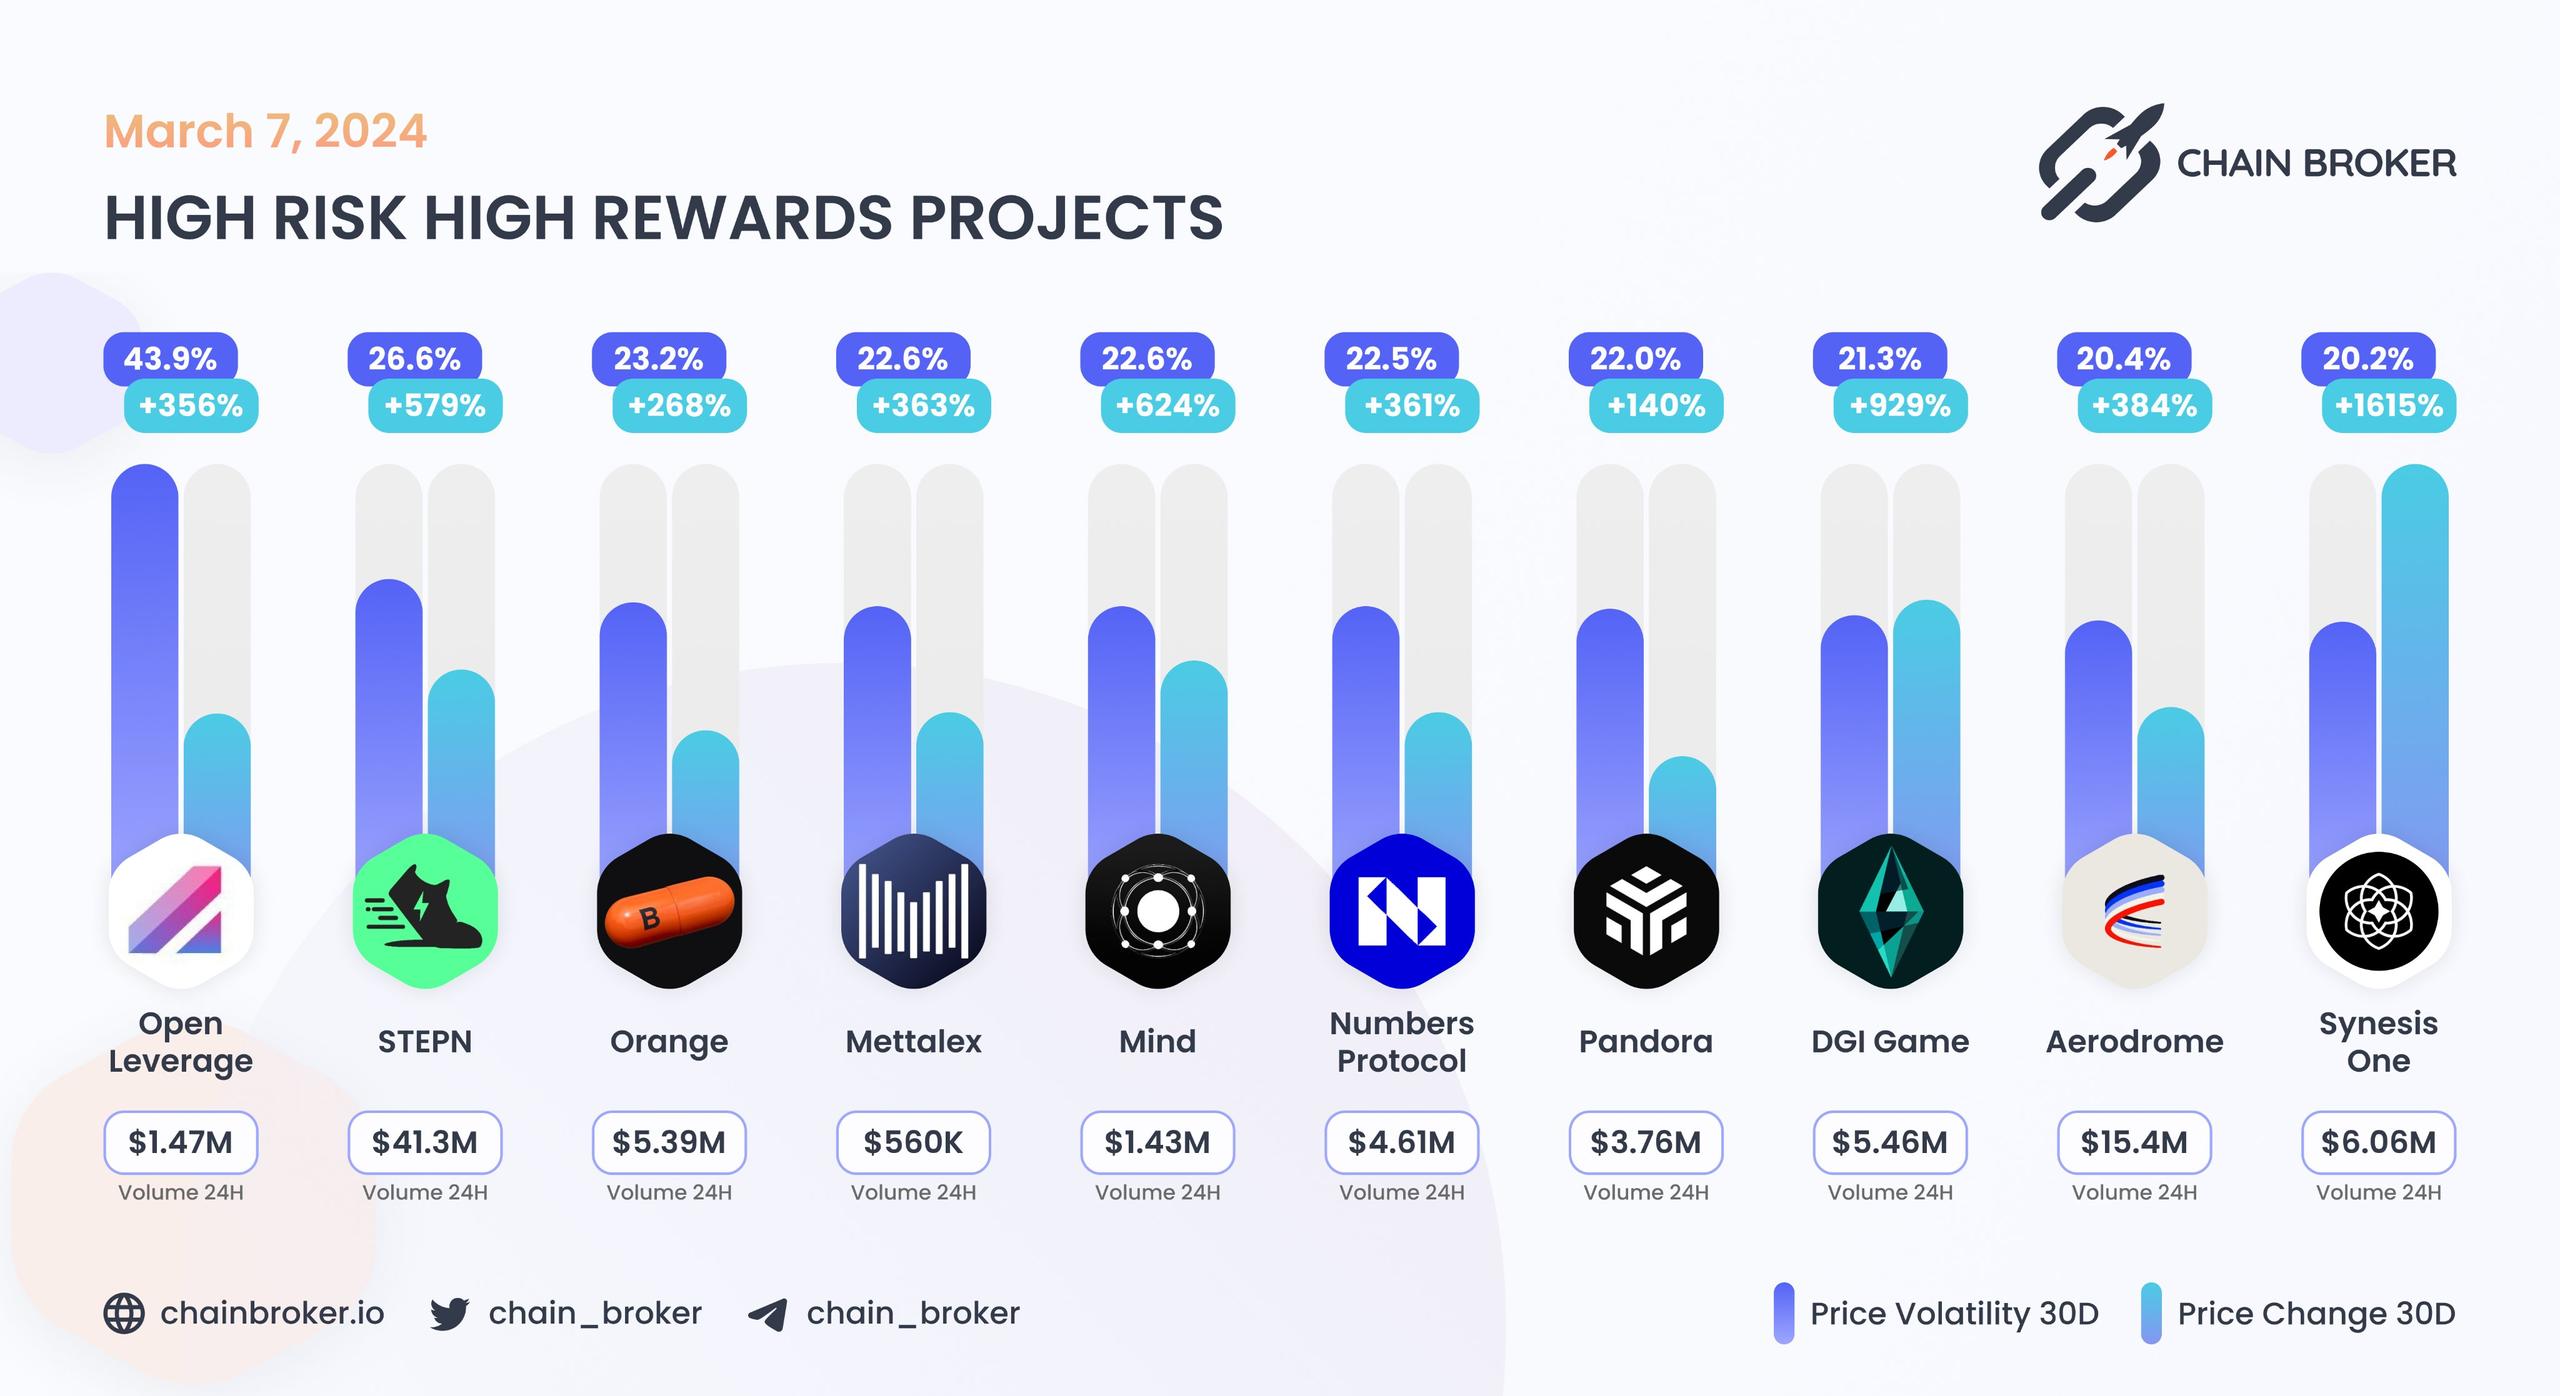 High risk high rewards projects